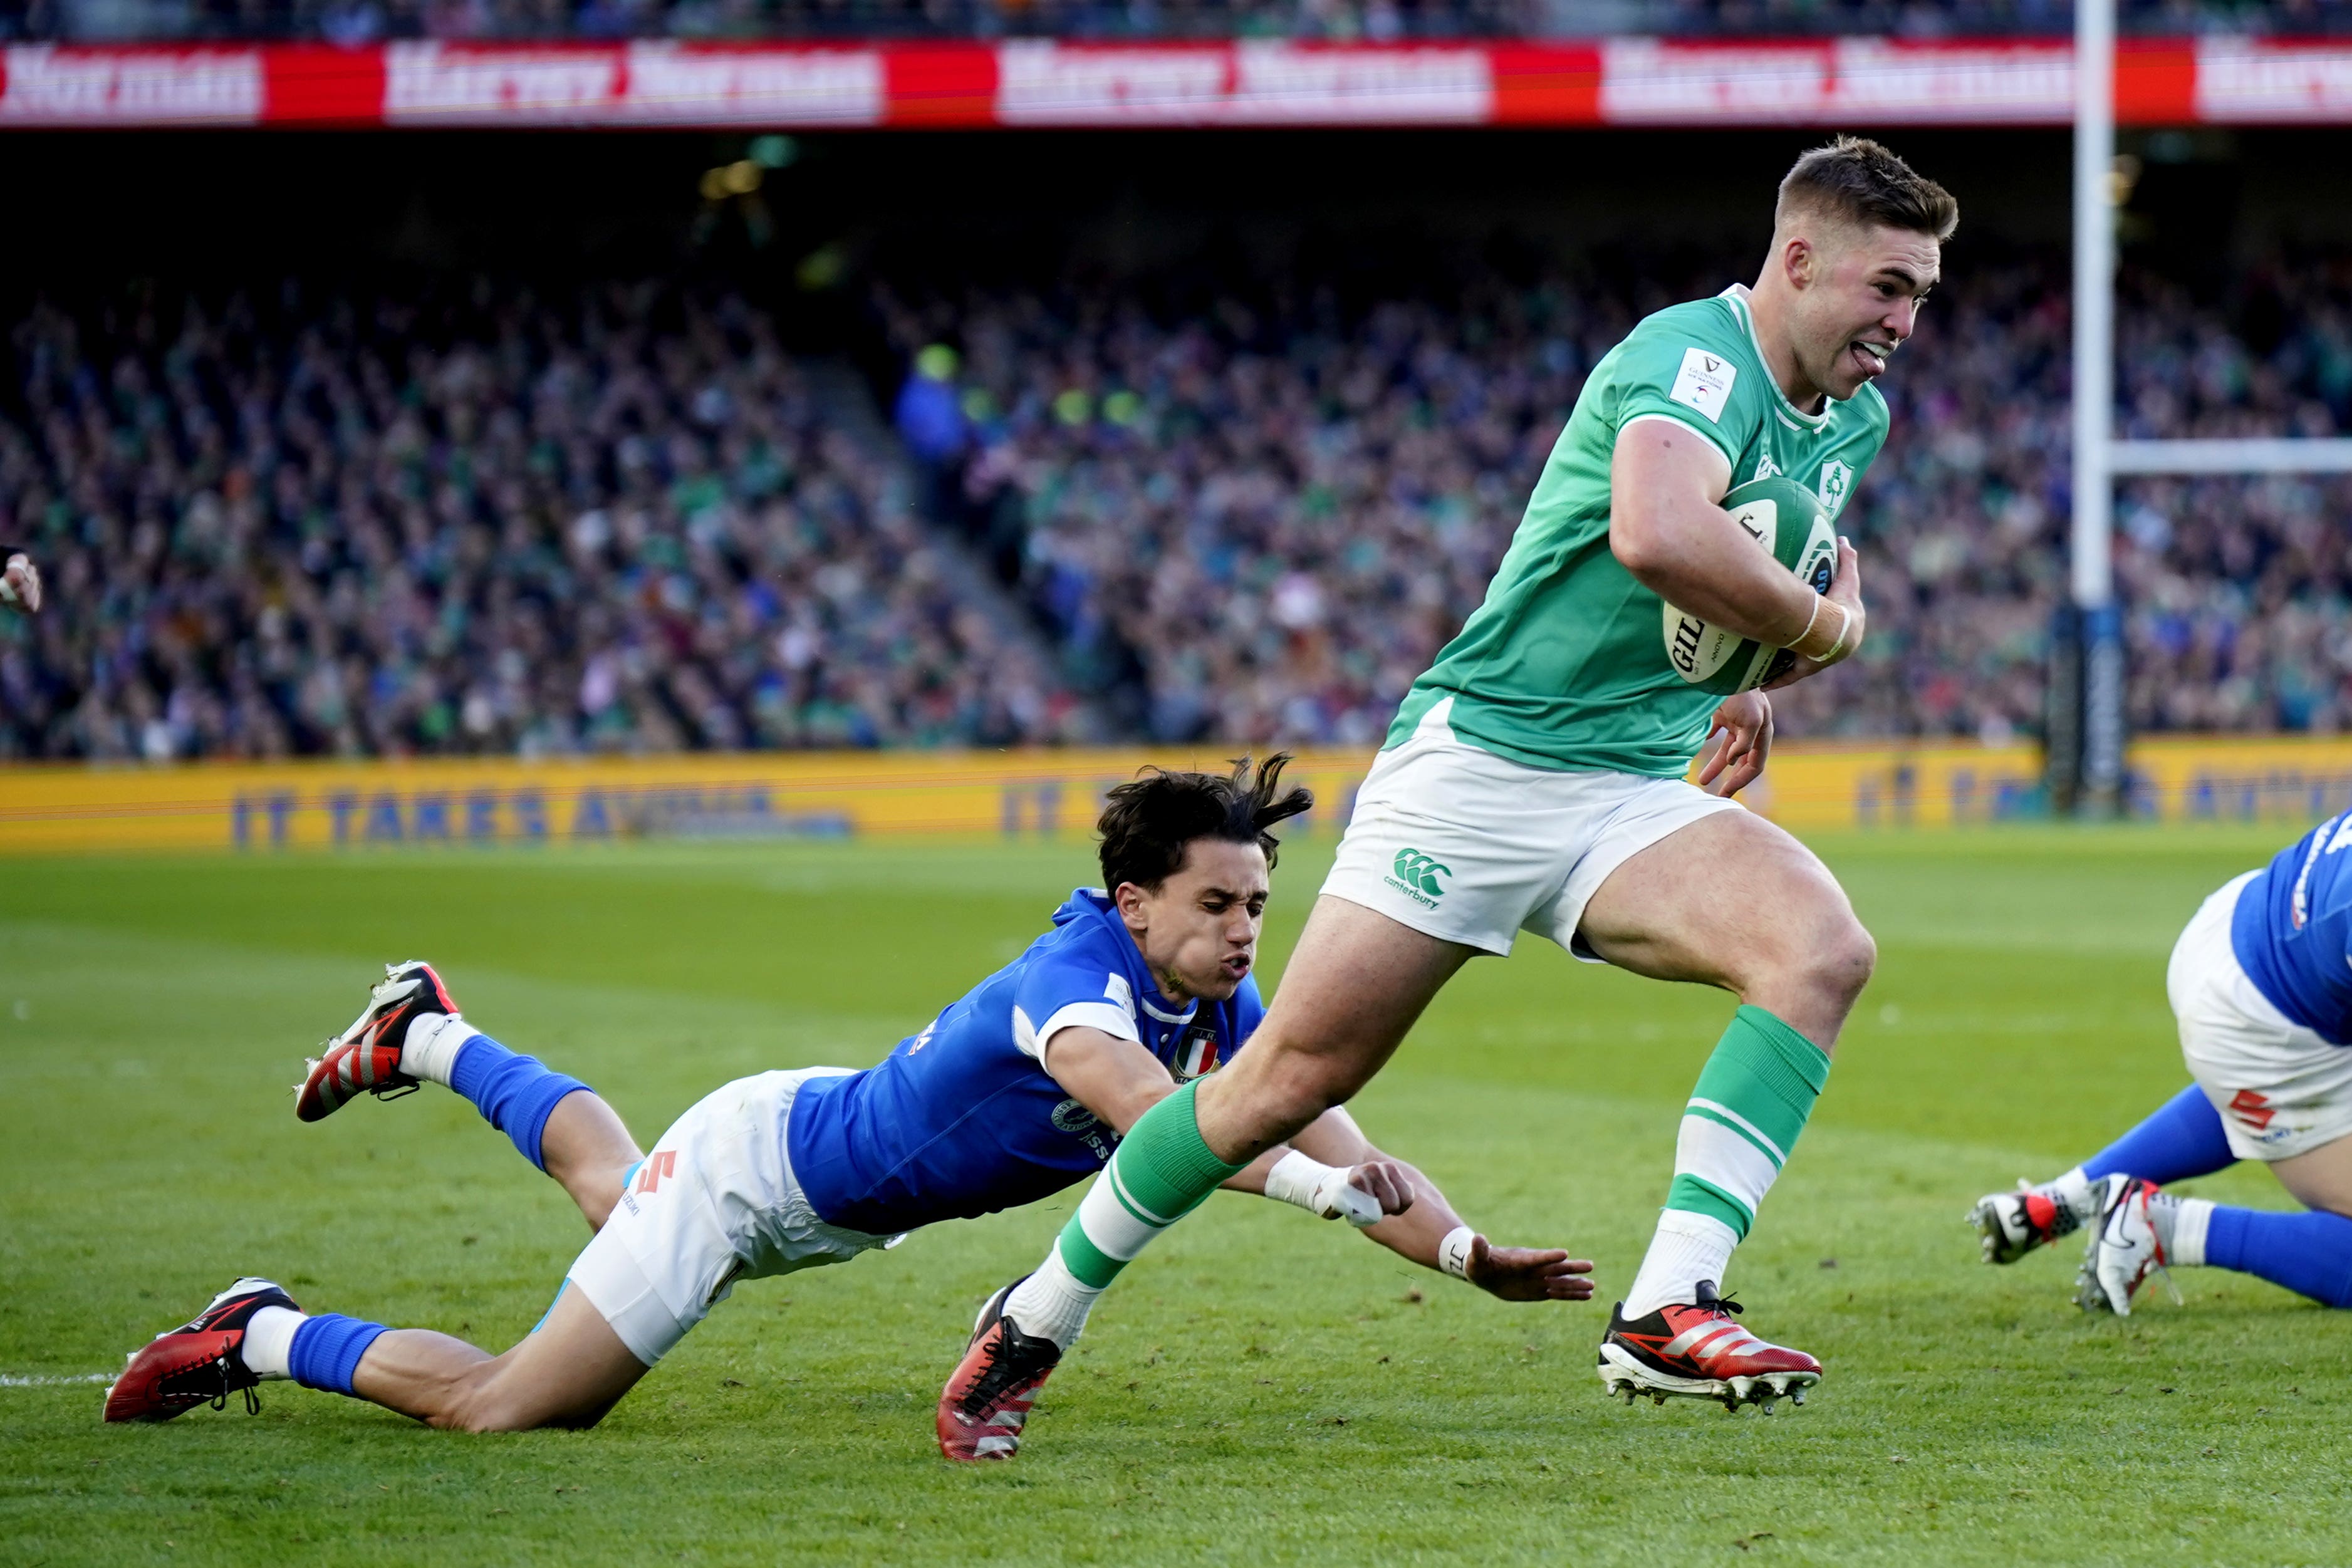 Jack Crowley, pictured, is tasked with filling the void left by Johnny Sexton’s retirement (Niall Carson/PA)